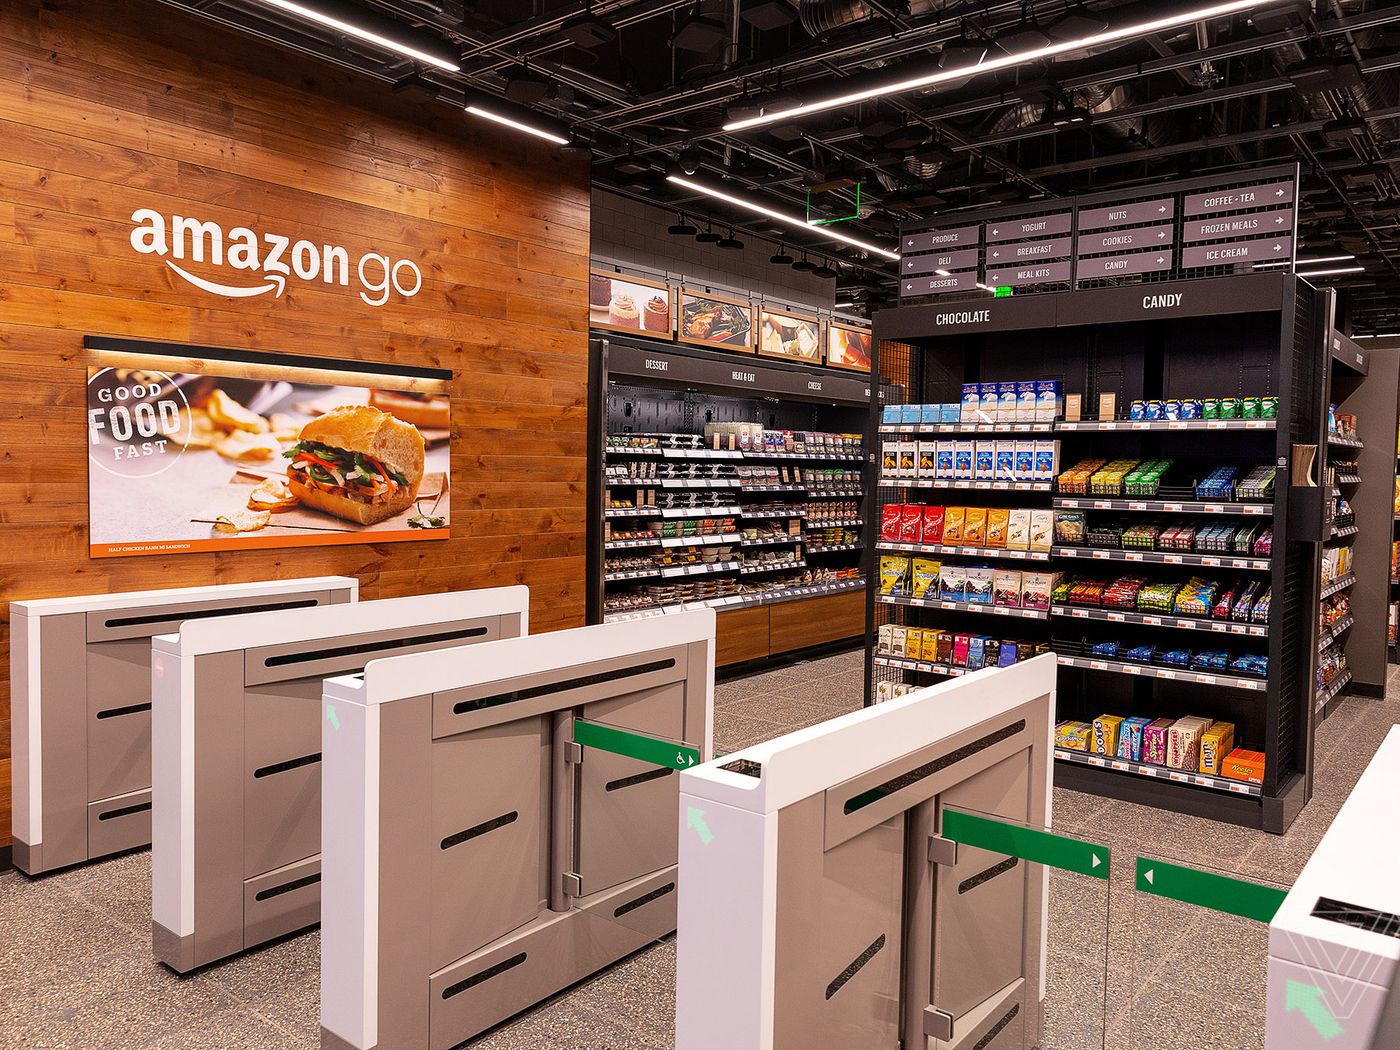 Amazon To Reach More Third-Party Stores With Cashier-Less “Just Walk Out” Tech